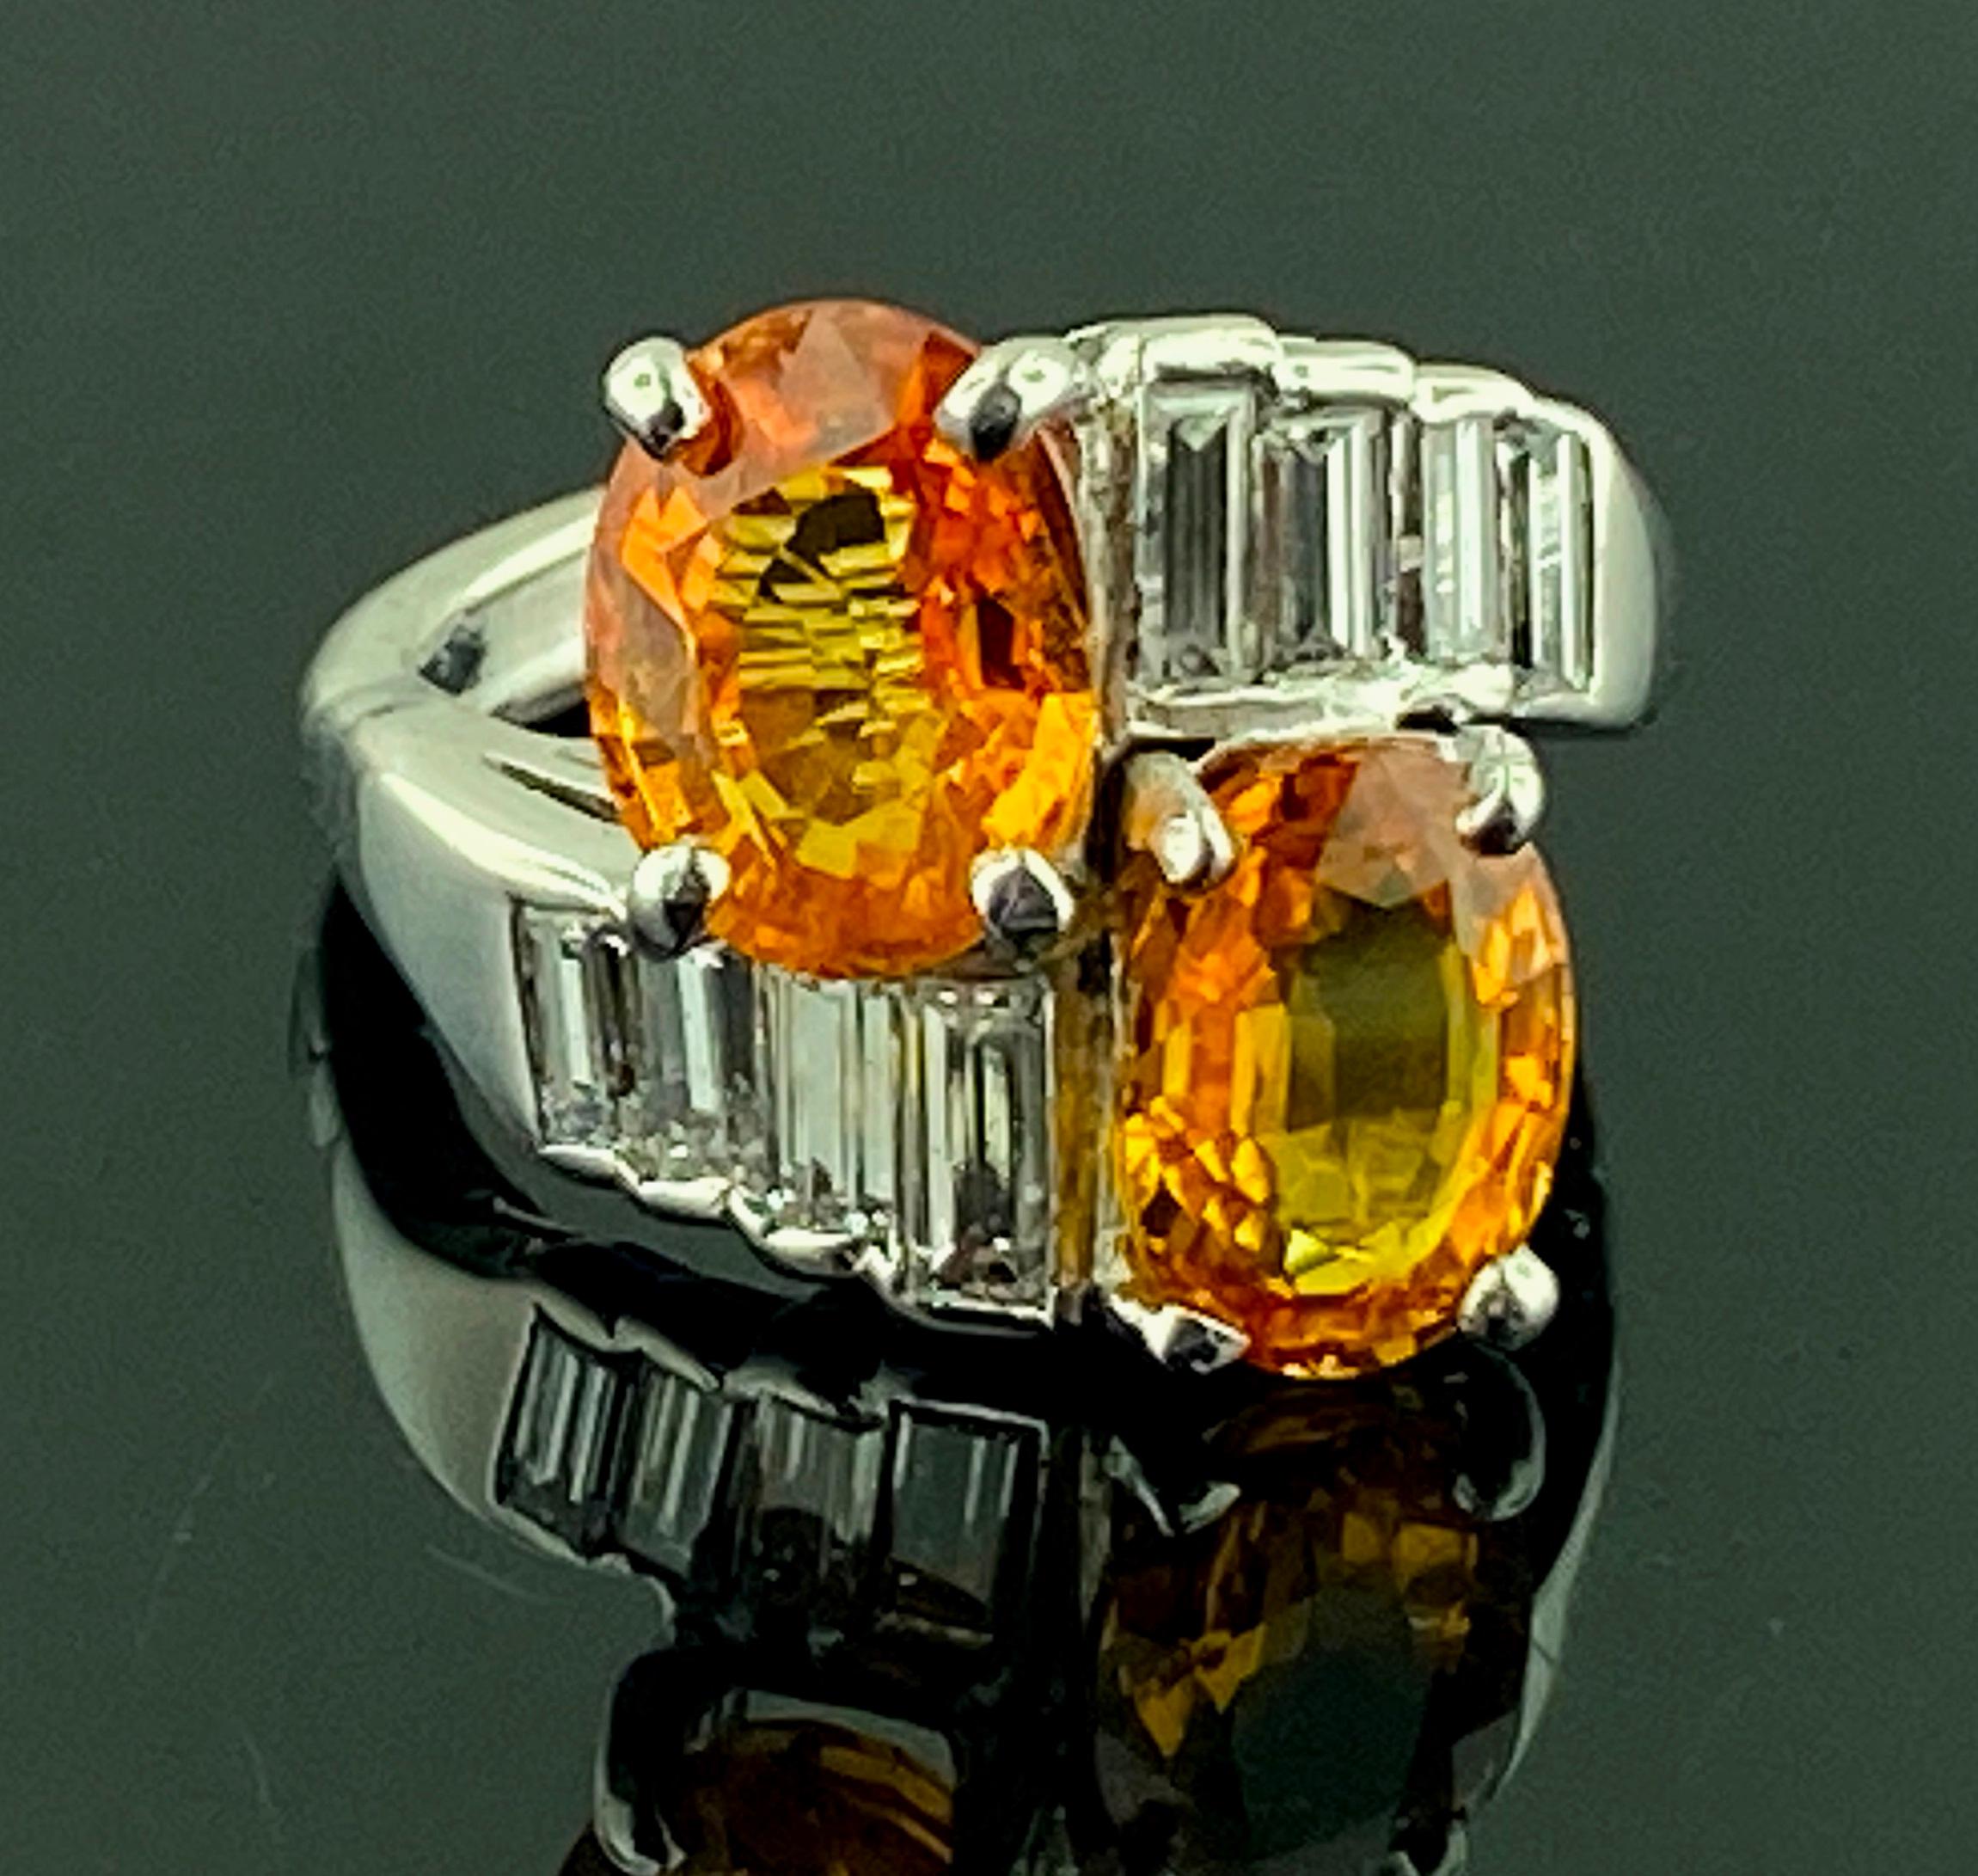 The top part of this ring that houses the two Oval cut Orange Sapphires is in Platinum.  The two Oval Orange Sapphires weigh 2.55 carats and 2.19 carats for a total weight of 4.75 carats.  The mounting, which is 14 karat white gold, contains 8